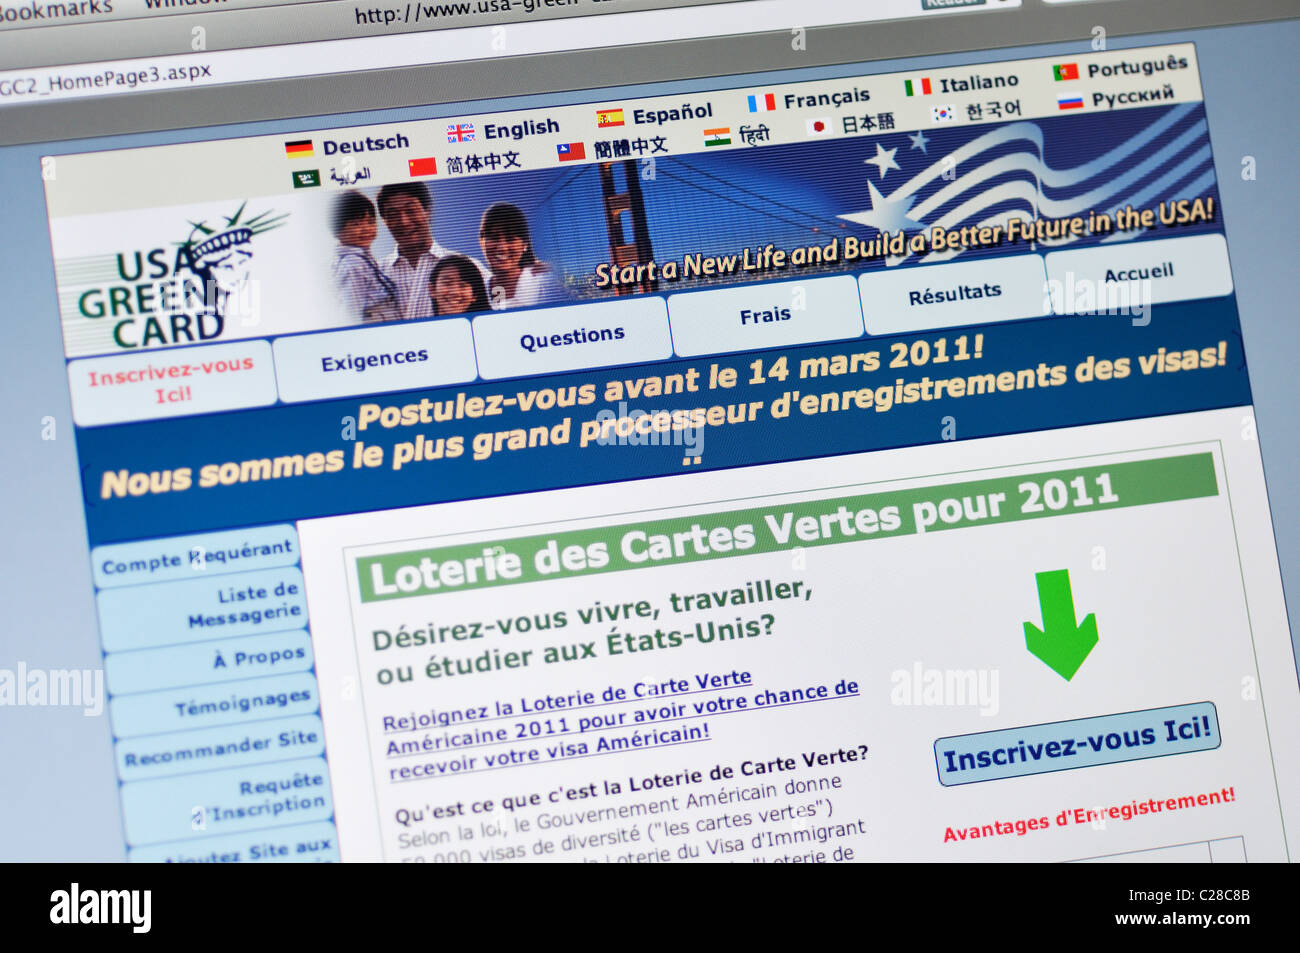 USA Green Card Lottery website - in French Stock Photo